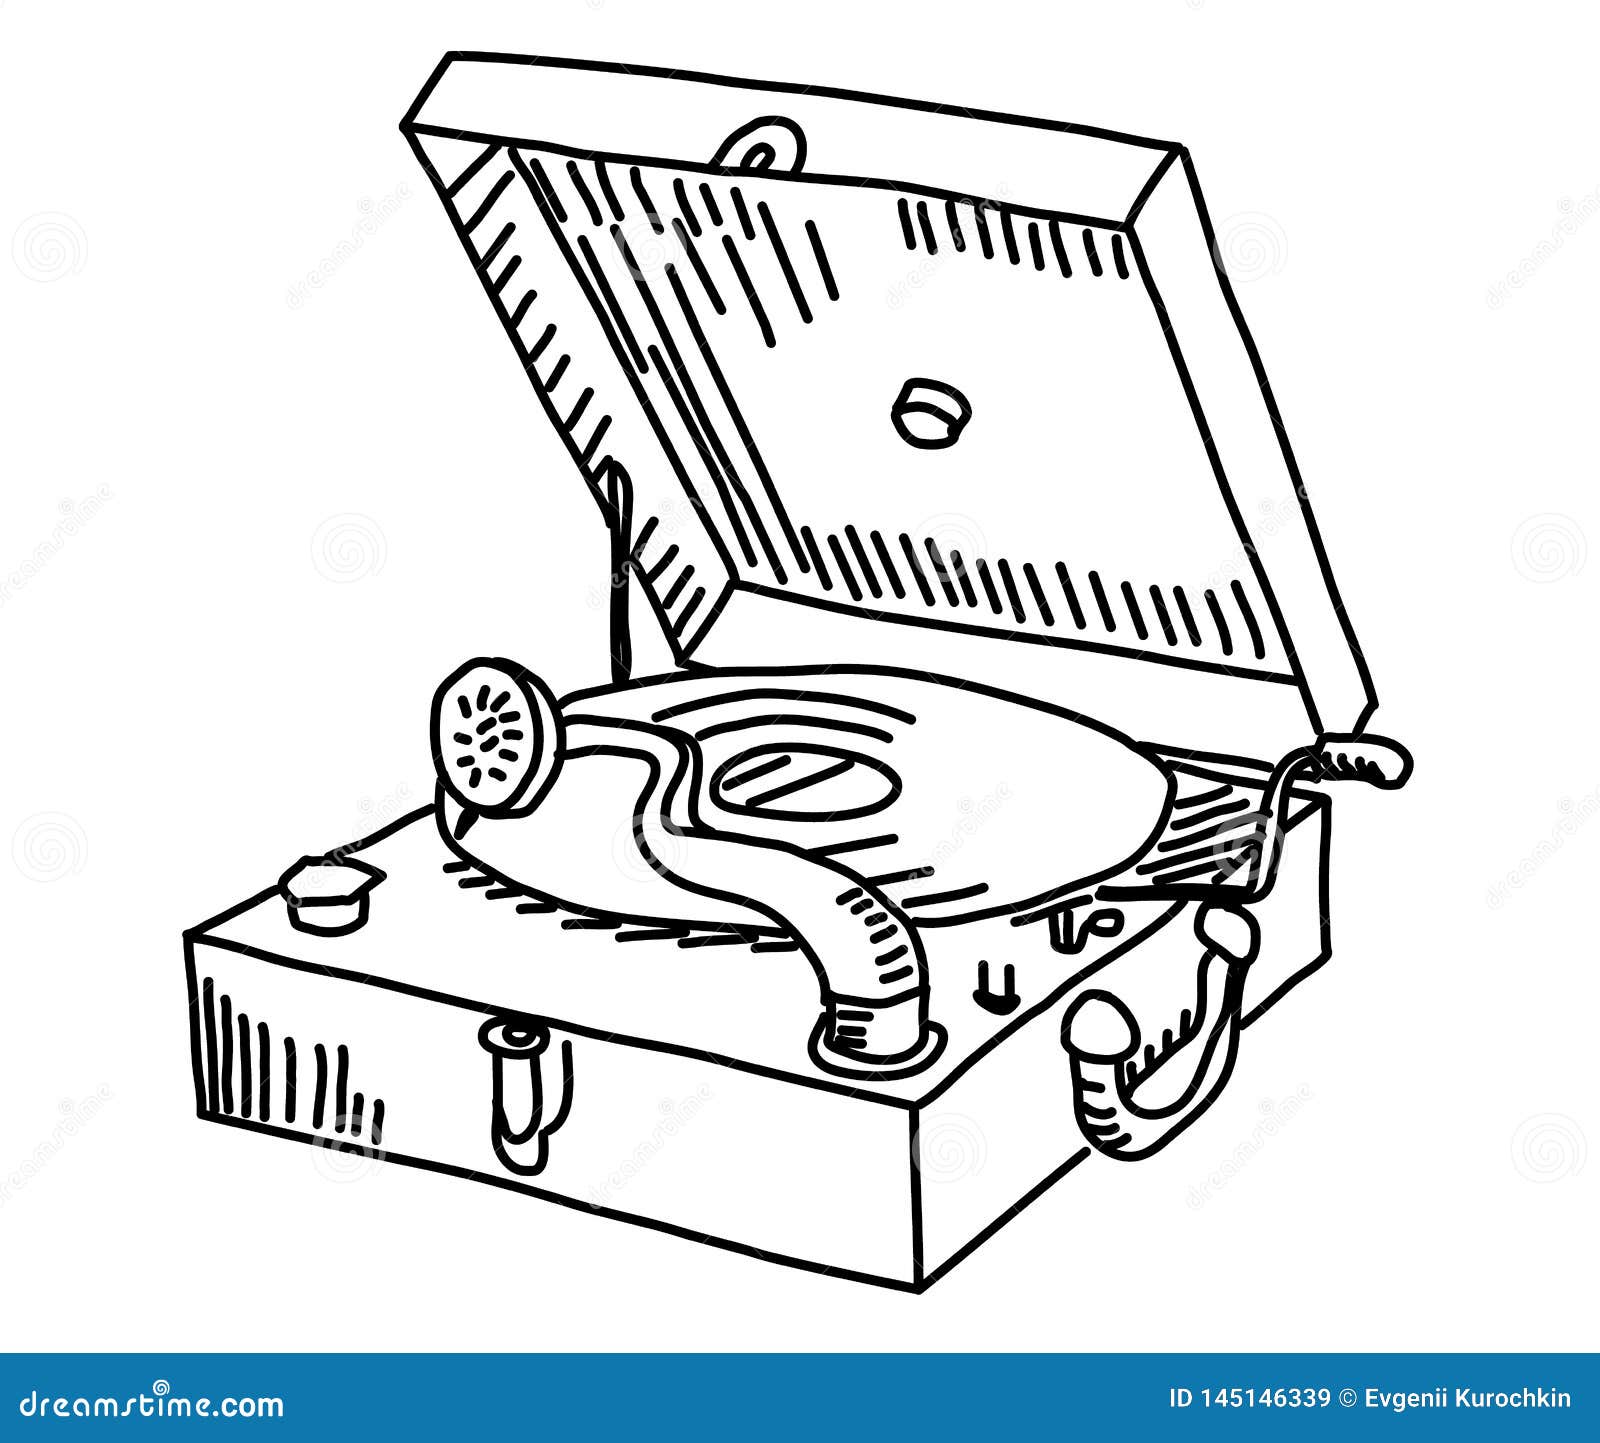 Phonograph. Line Drawing Vector Stock Illustration - Illustration of ...